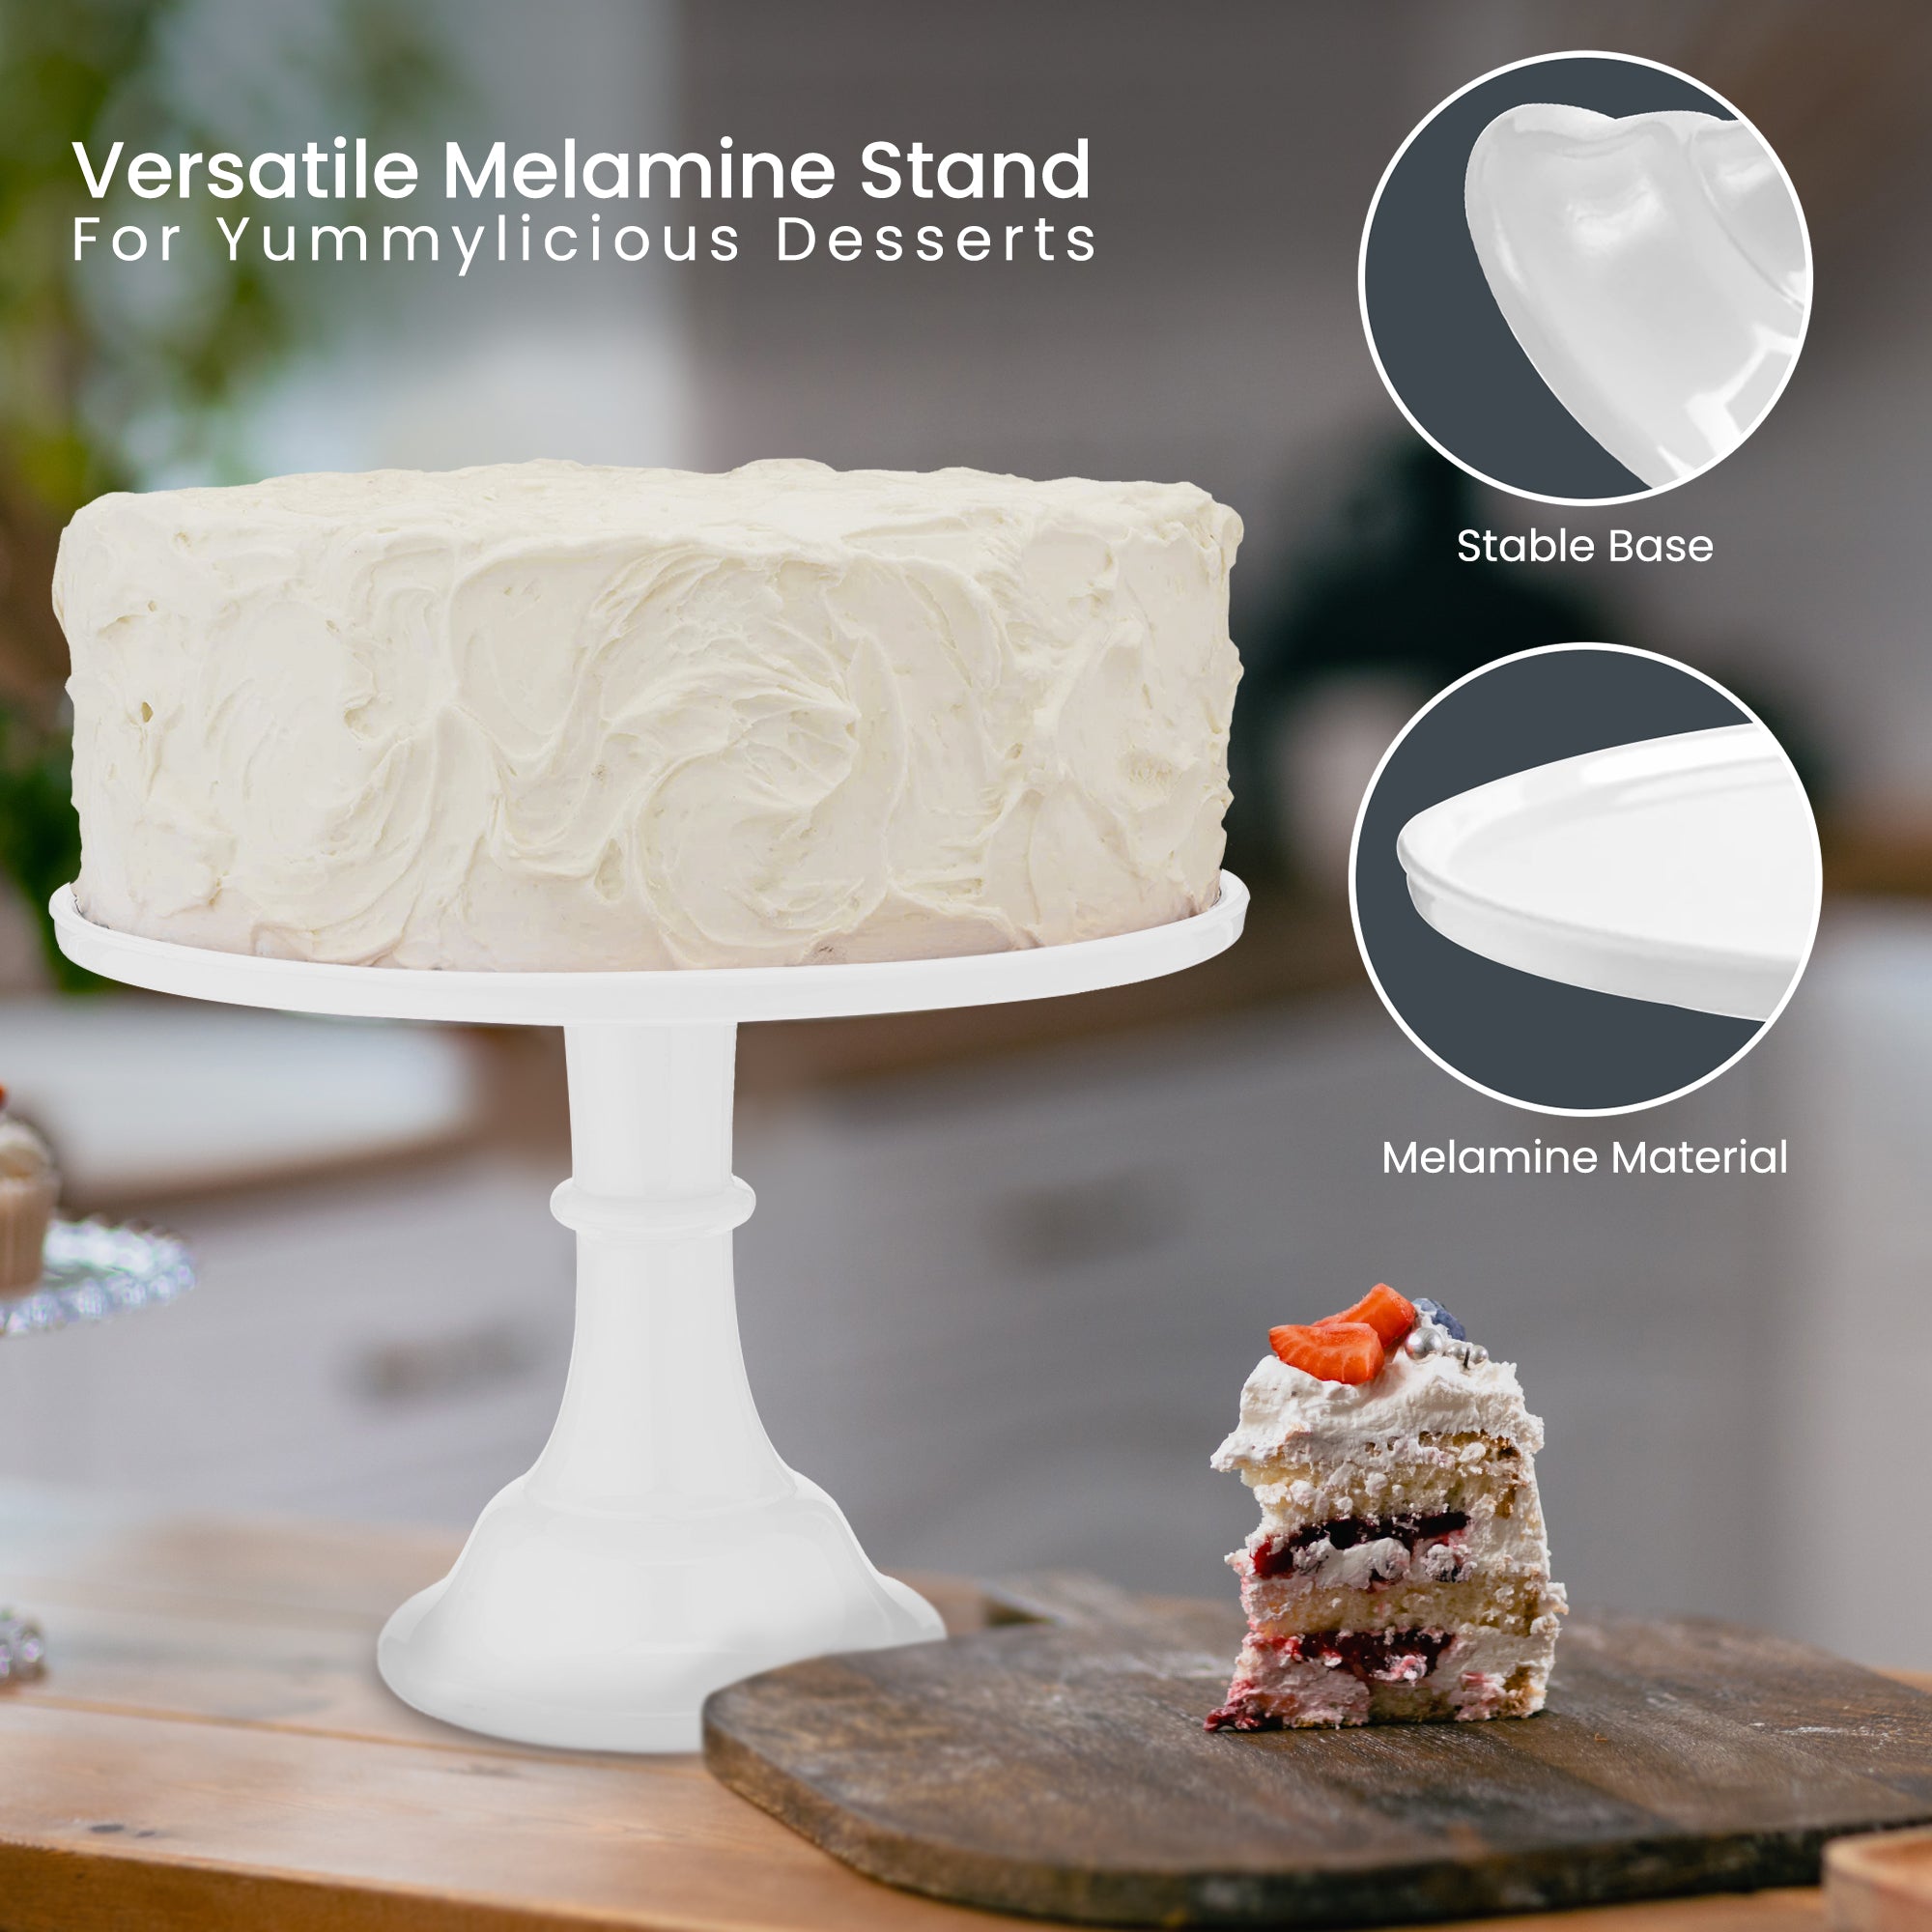 Cloudzy 11 inch Cake Cake Stand Price in India - Buy Cloudzy 11